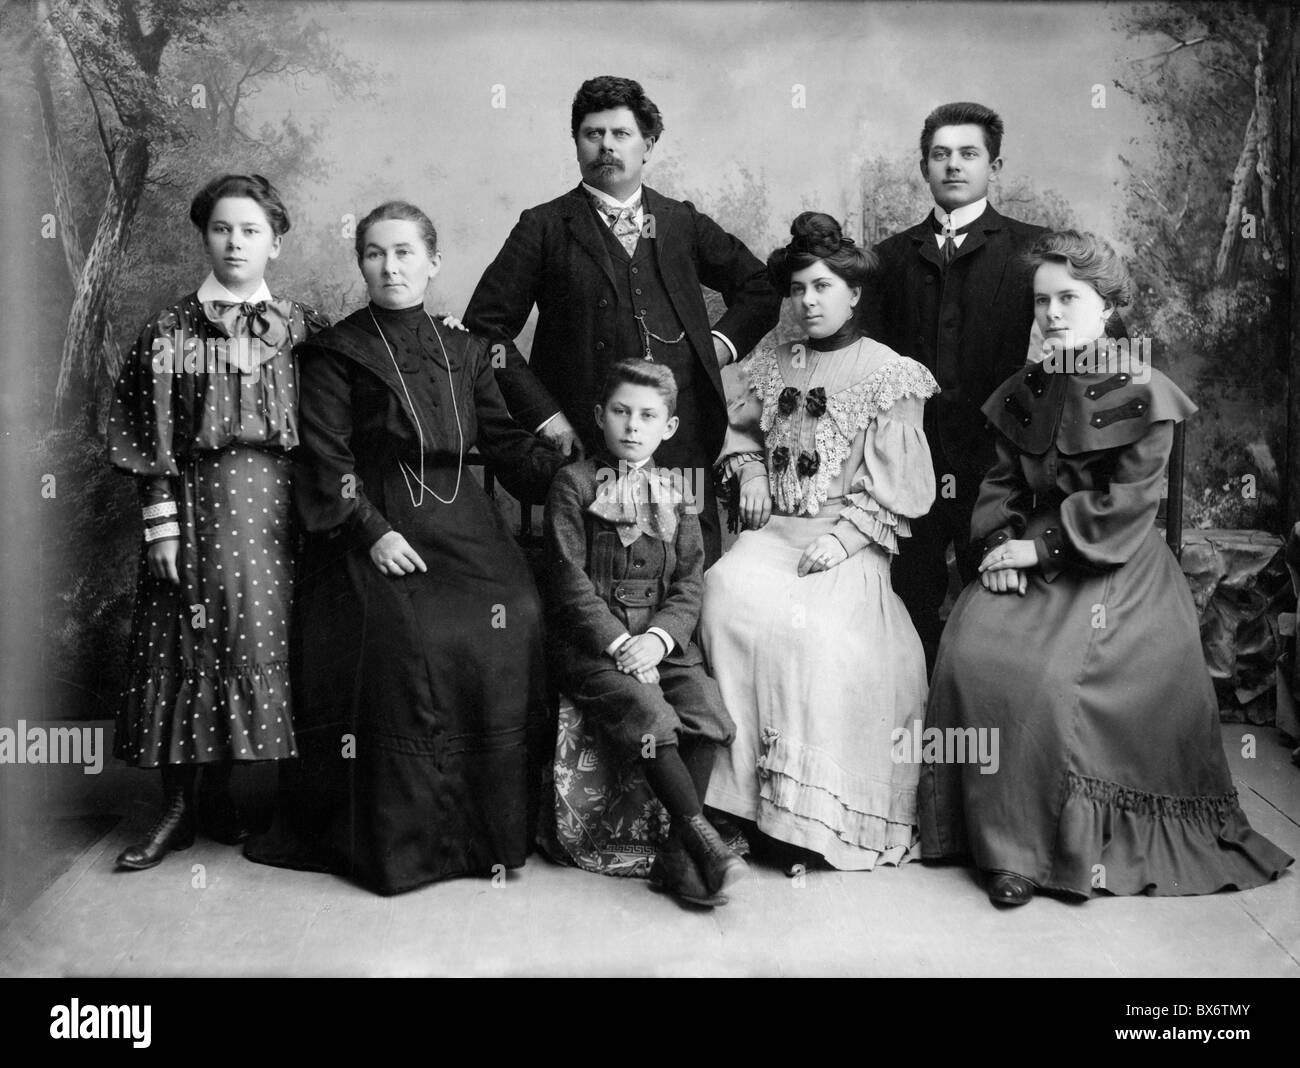 people, family, group picture, circa 1905, Additional-Rights ...